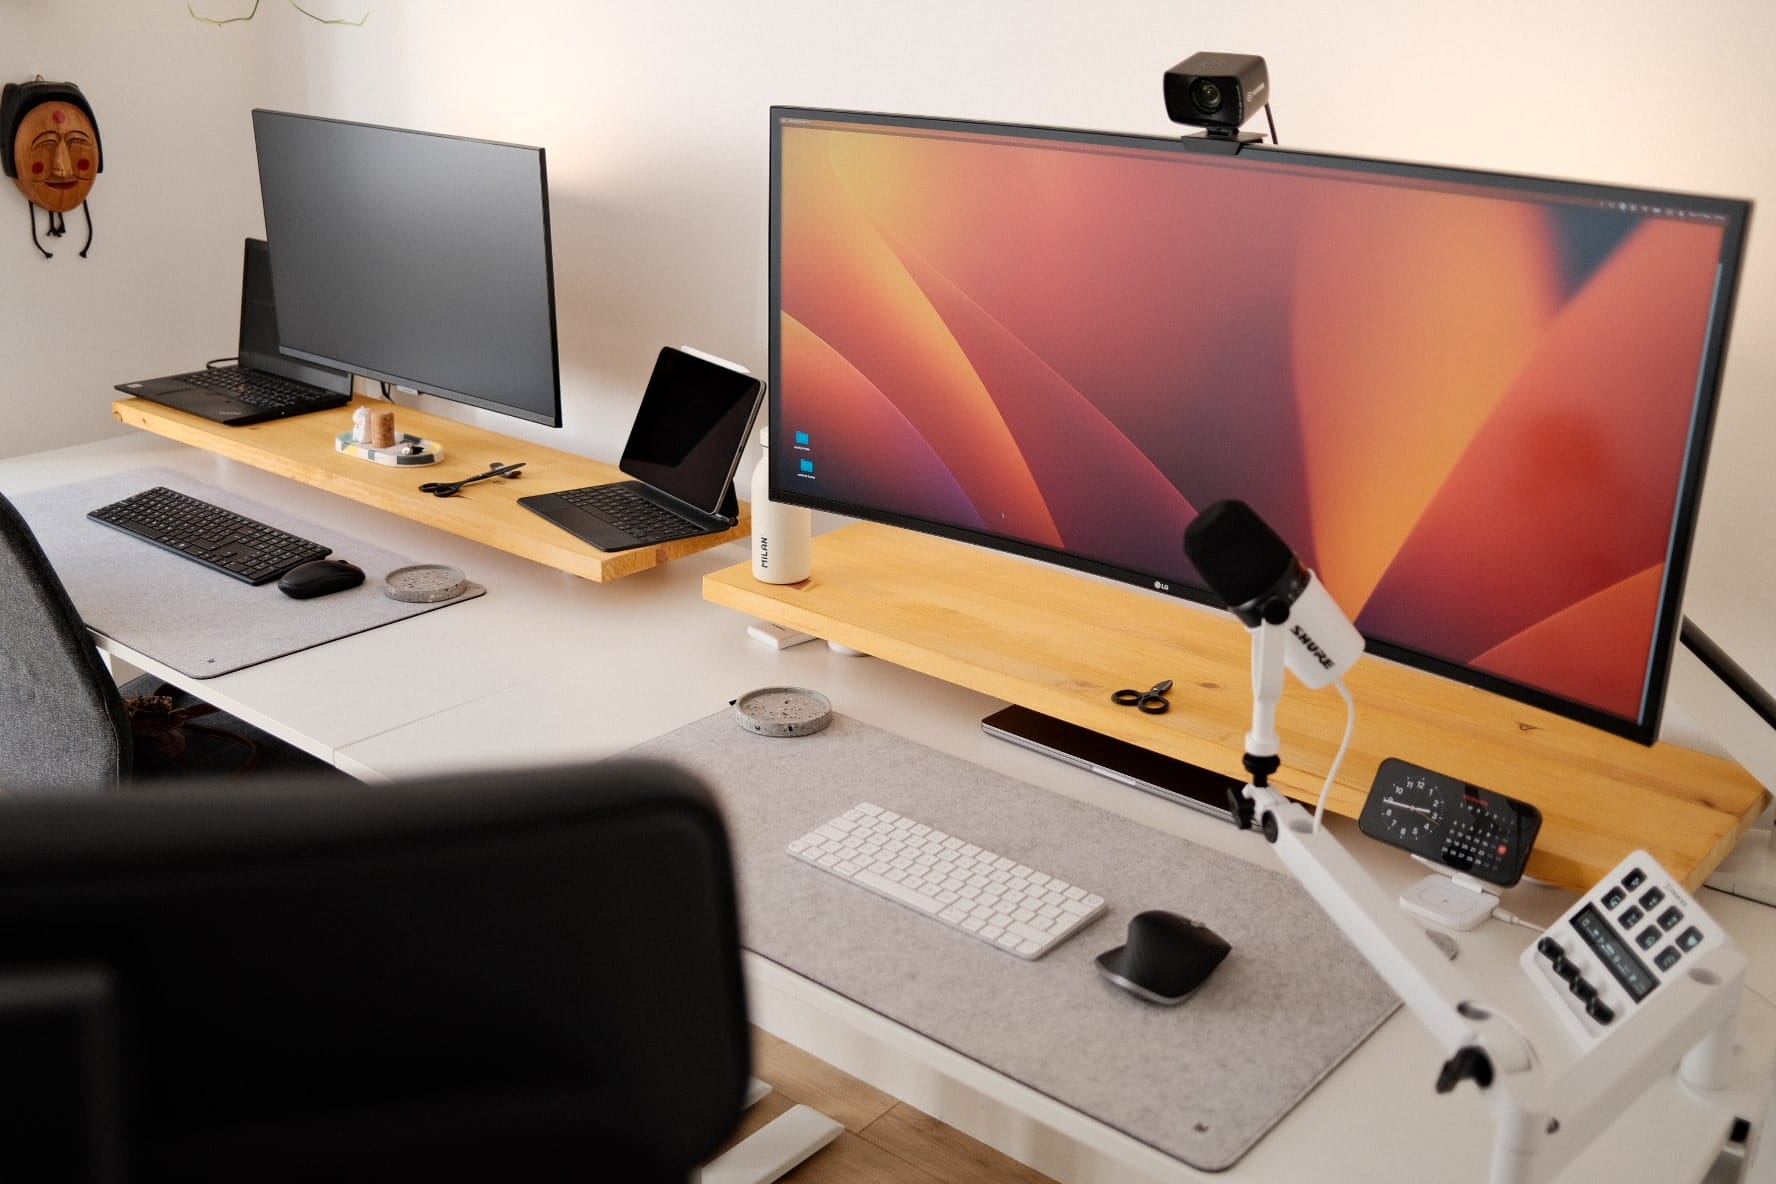 A neatly arranged shared workstation with two monitors, a laptop on a riser, a boom microphone, and assorted peripherals on a wooden desk, with a black office chair partially visible